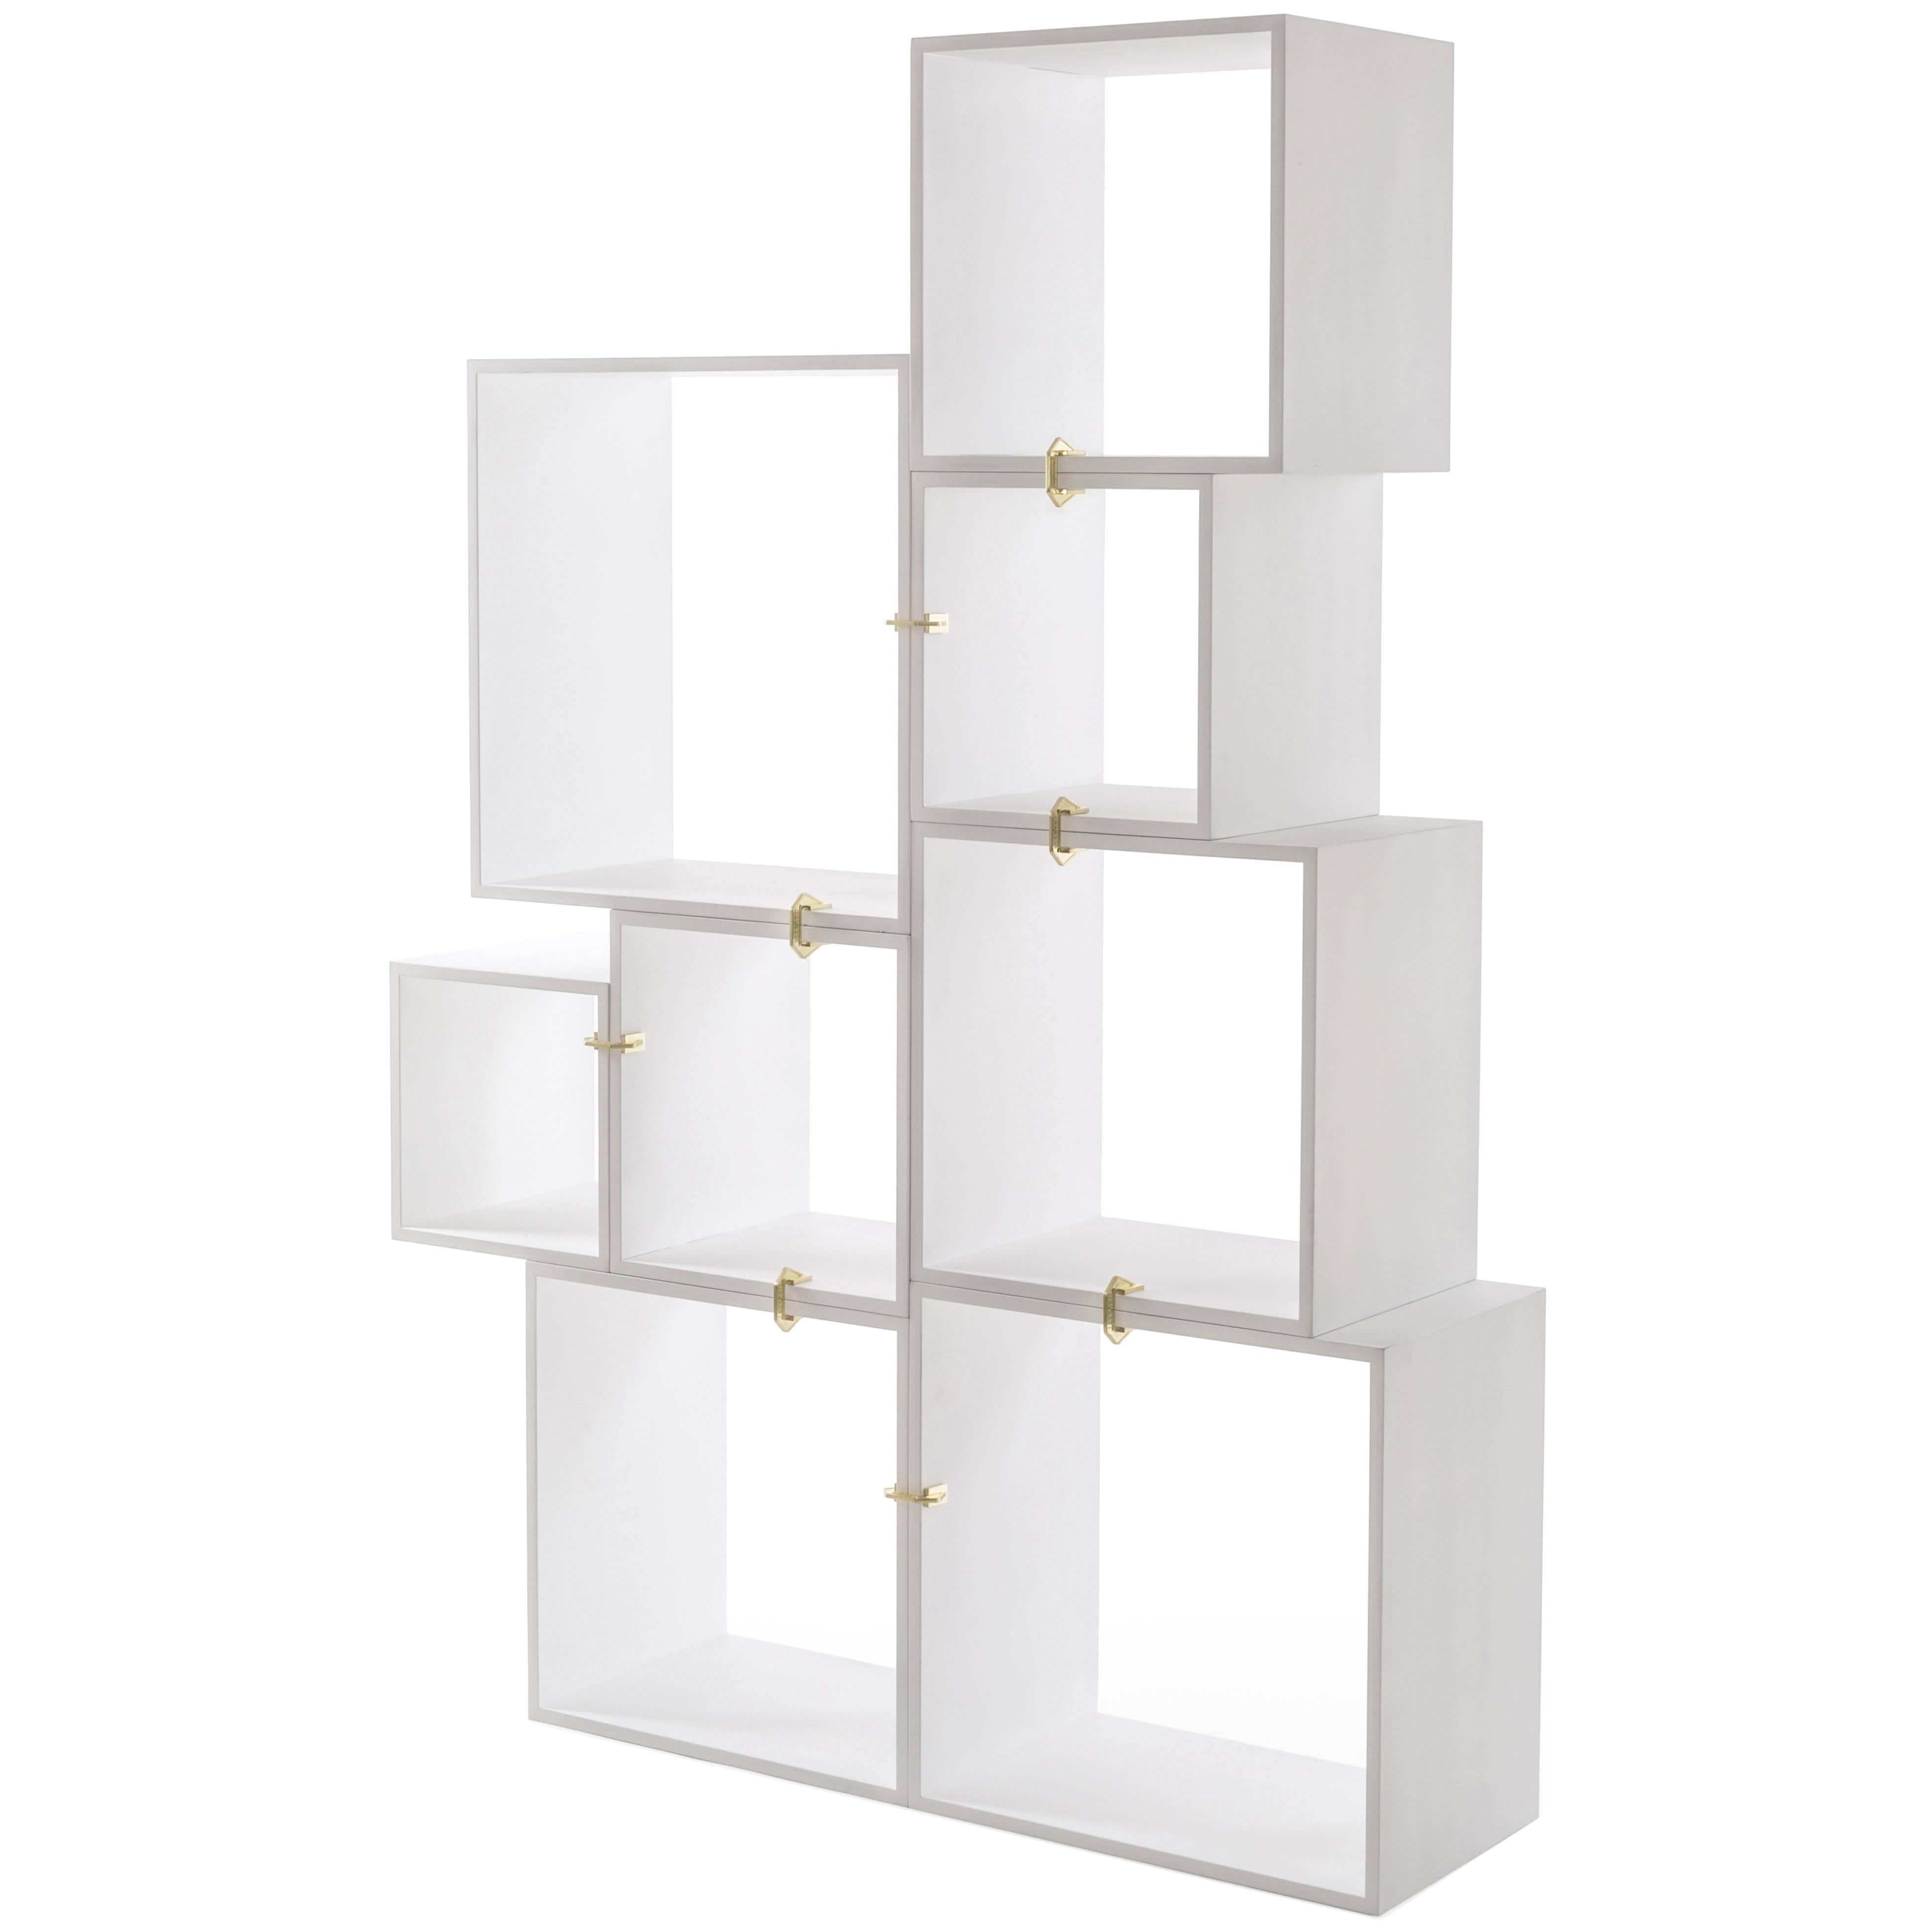 Seletti Laquered Modules in Wooden "Assemblage", Set of Eight Modules in White